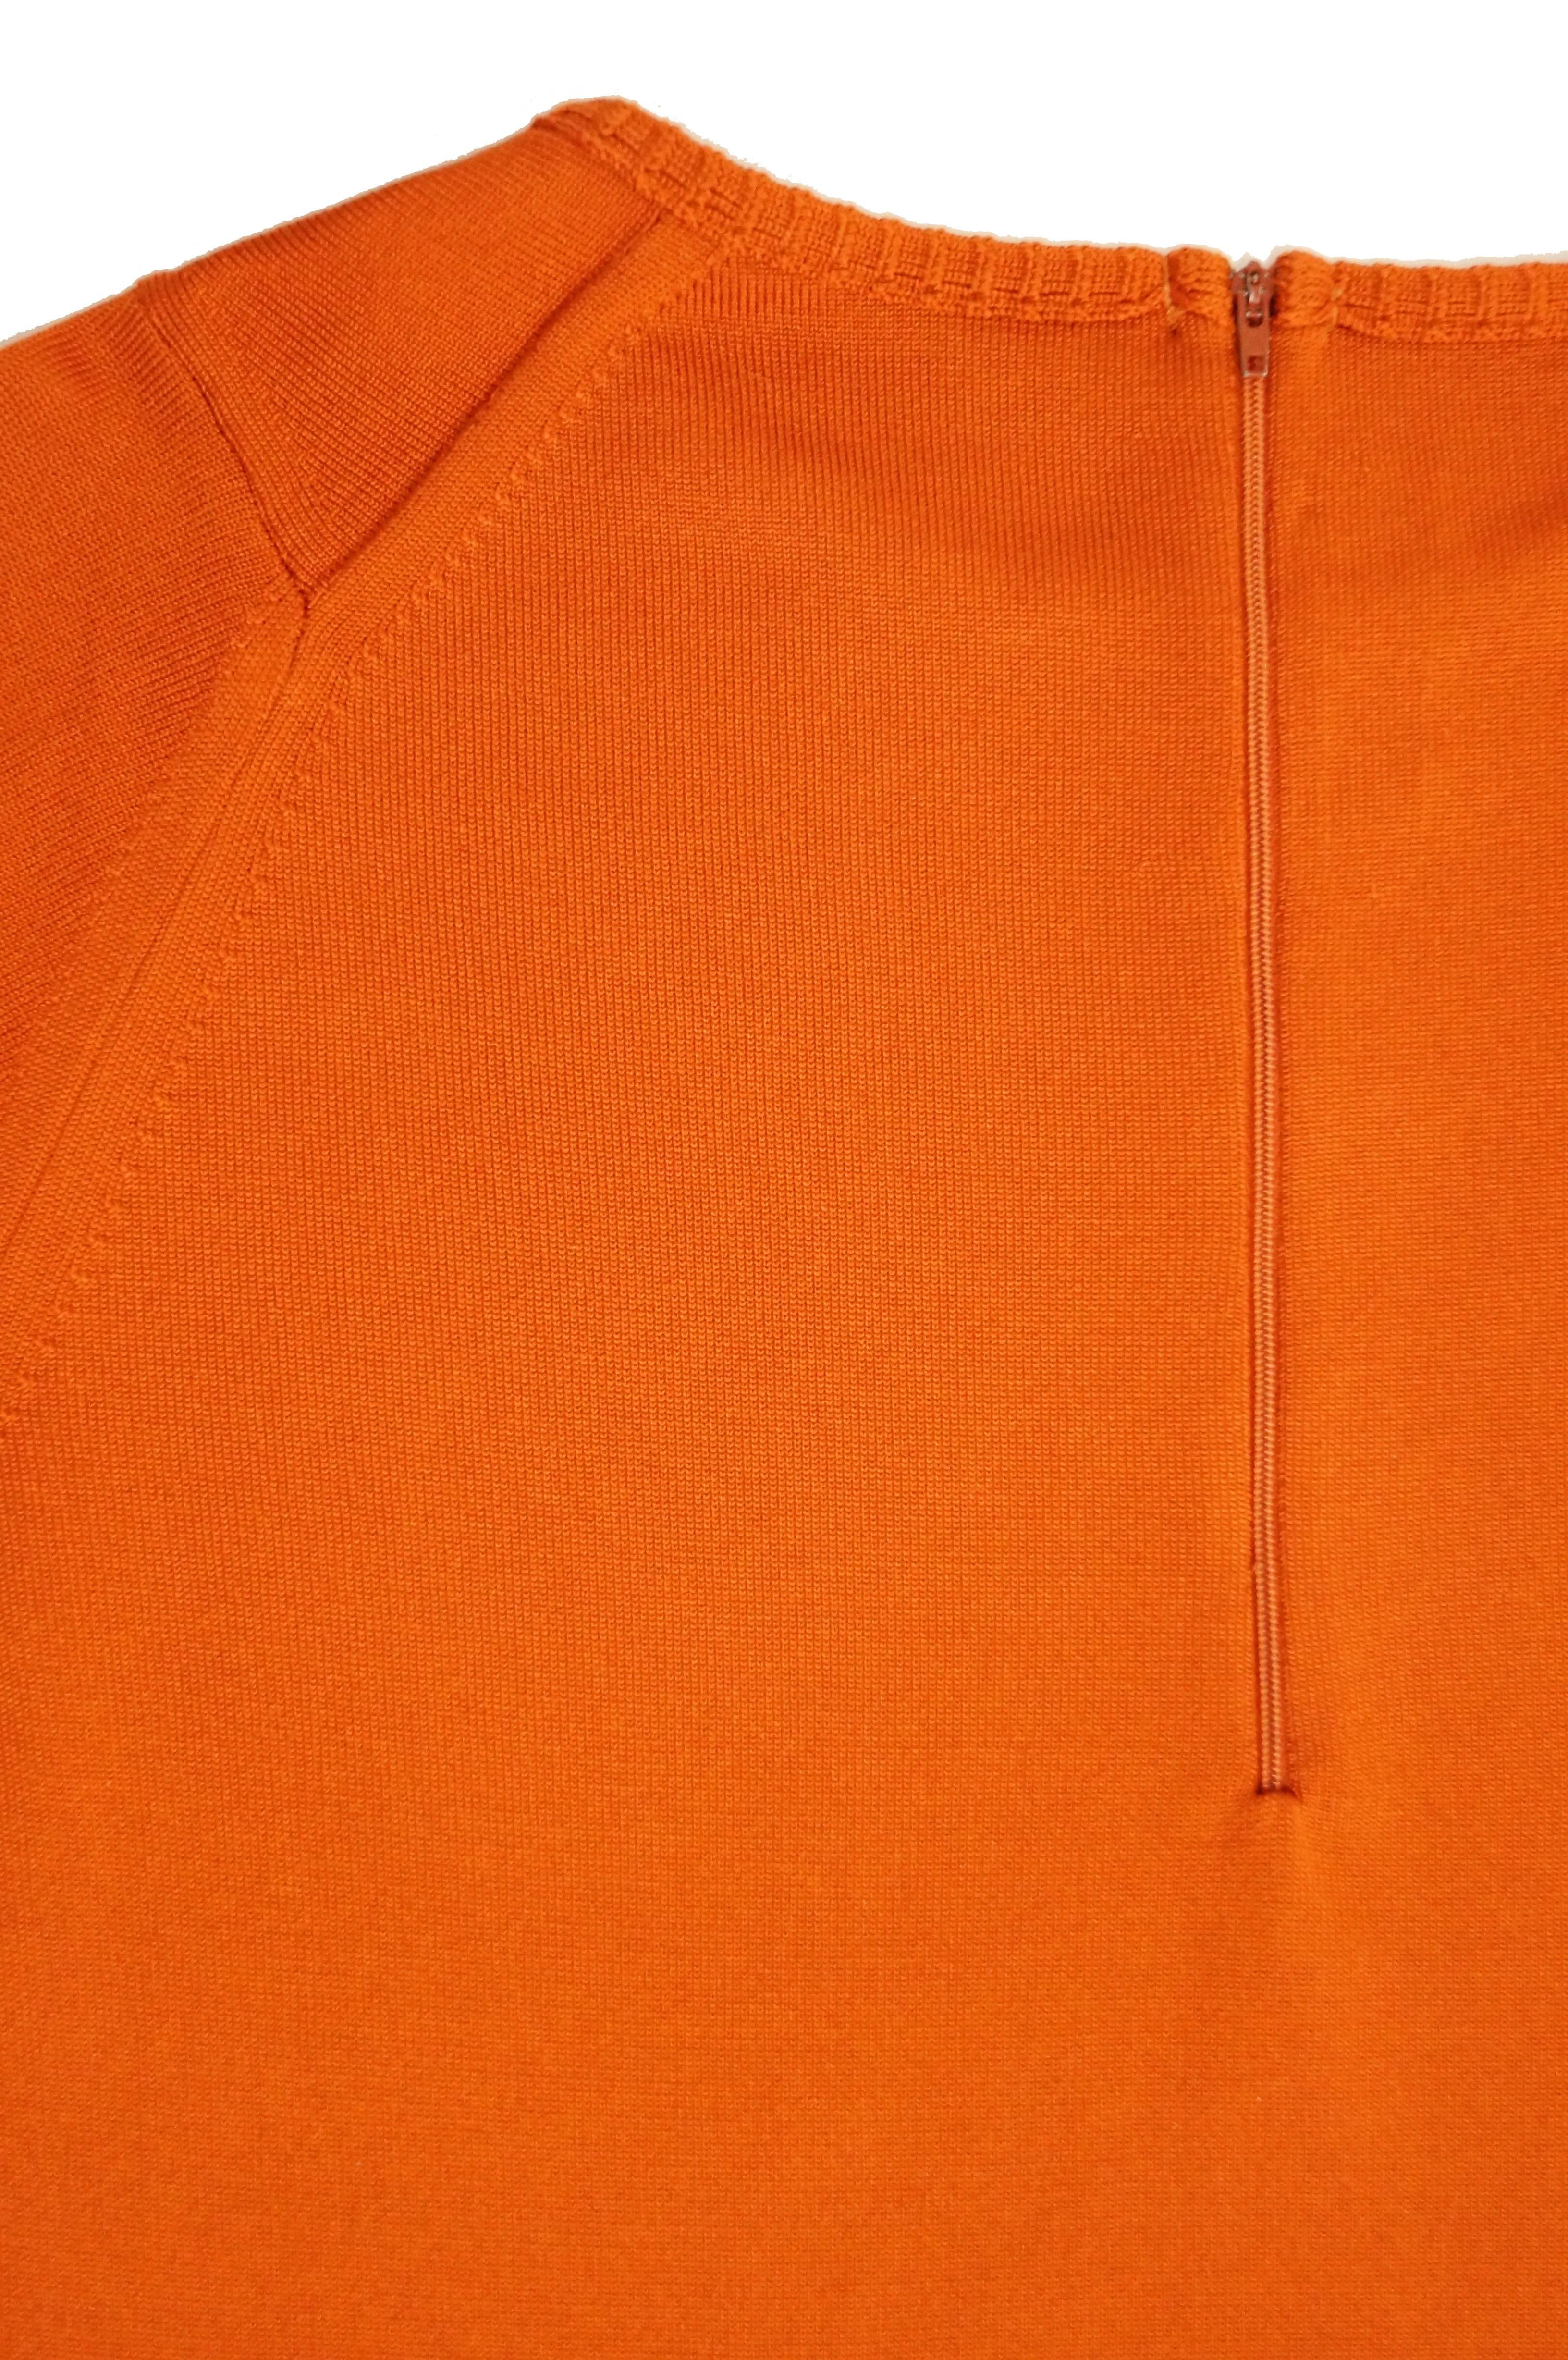 Givenchy Sport Tangerine Orange Pullover Sweater, 1970s  7